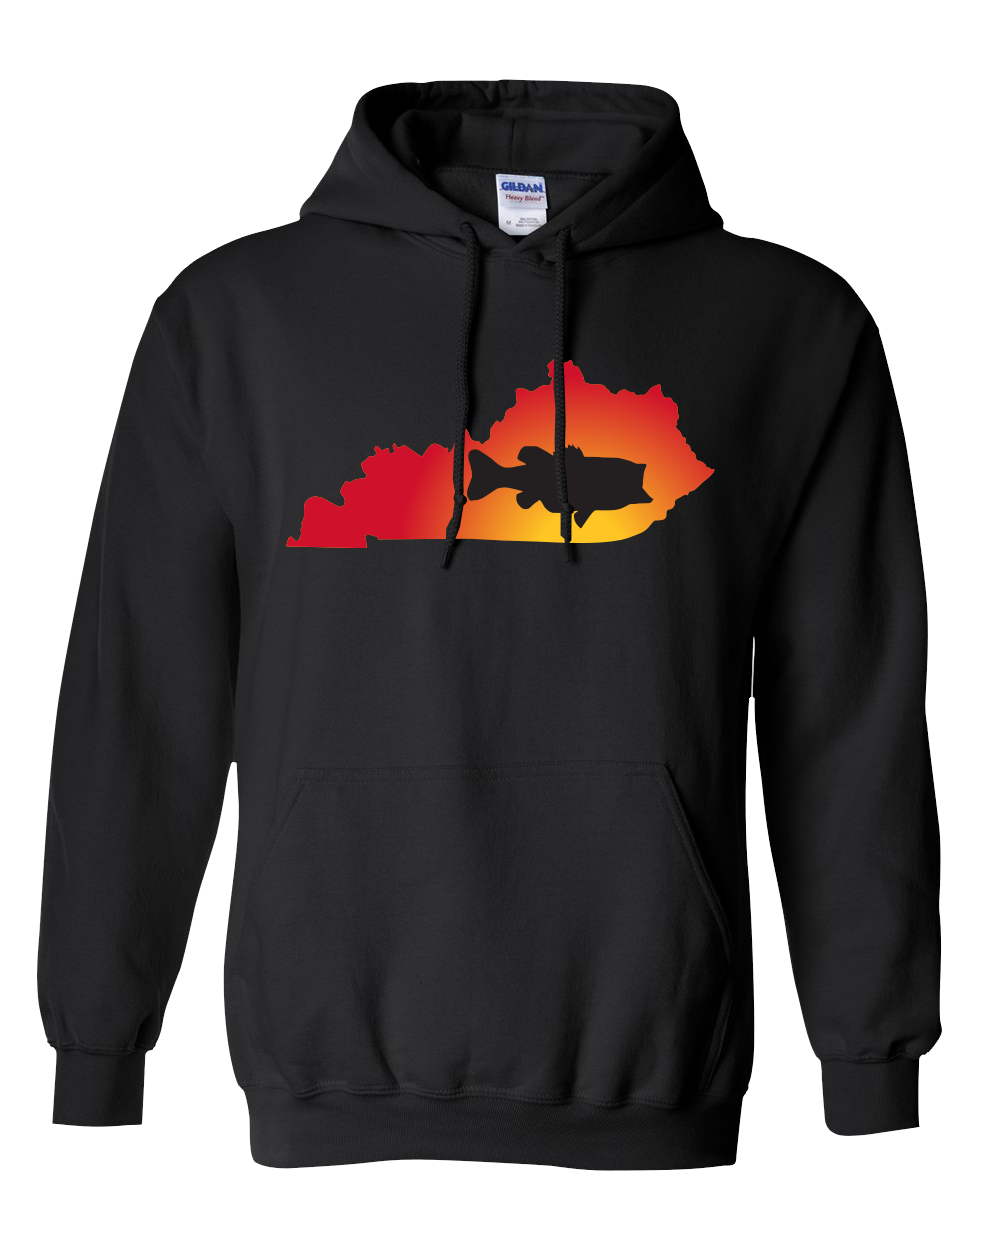 Pullover Hooded Sweatshirt Kentucky Black Large Mouth Bass Vibrant Design High Quality Tight Knit Ring Spun Low Maintenance Cotton Printed With The Newest Available Color Transfer Technology